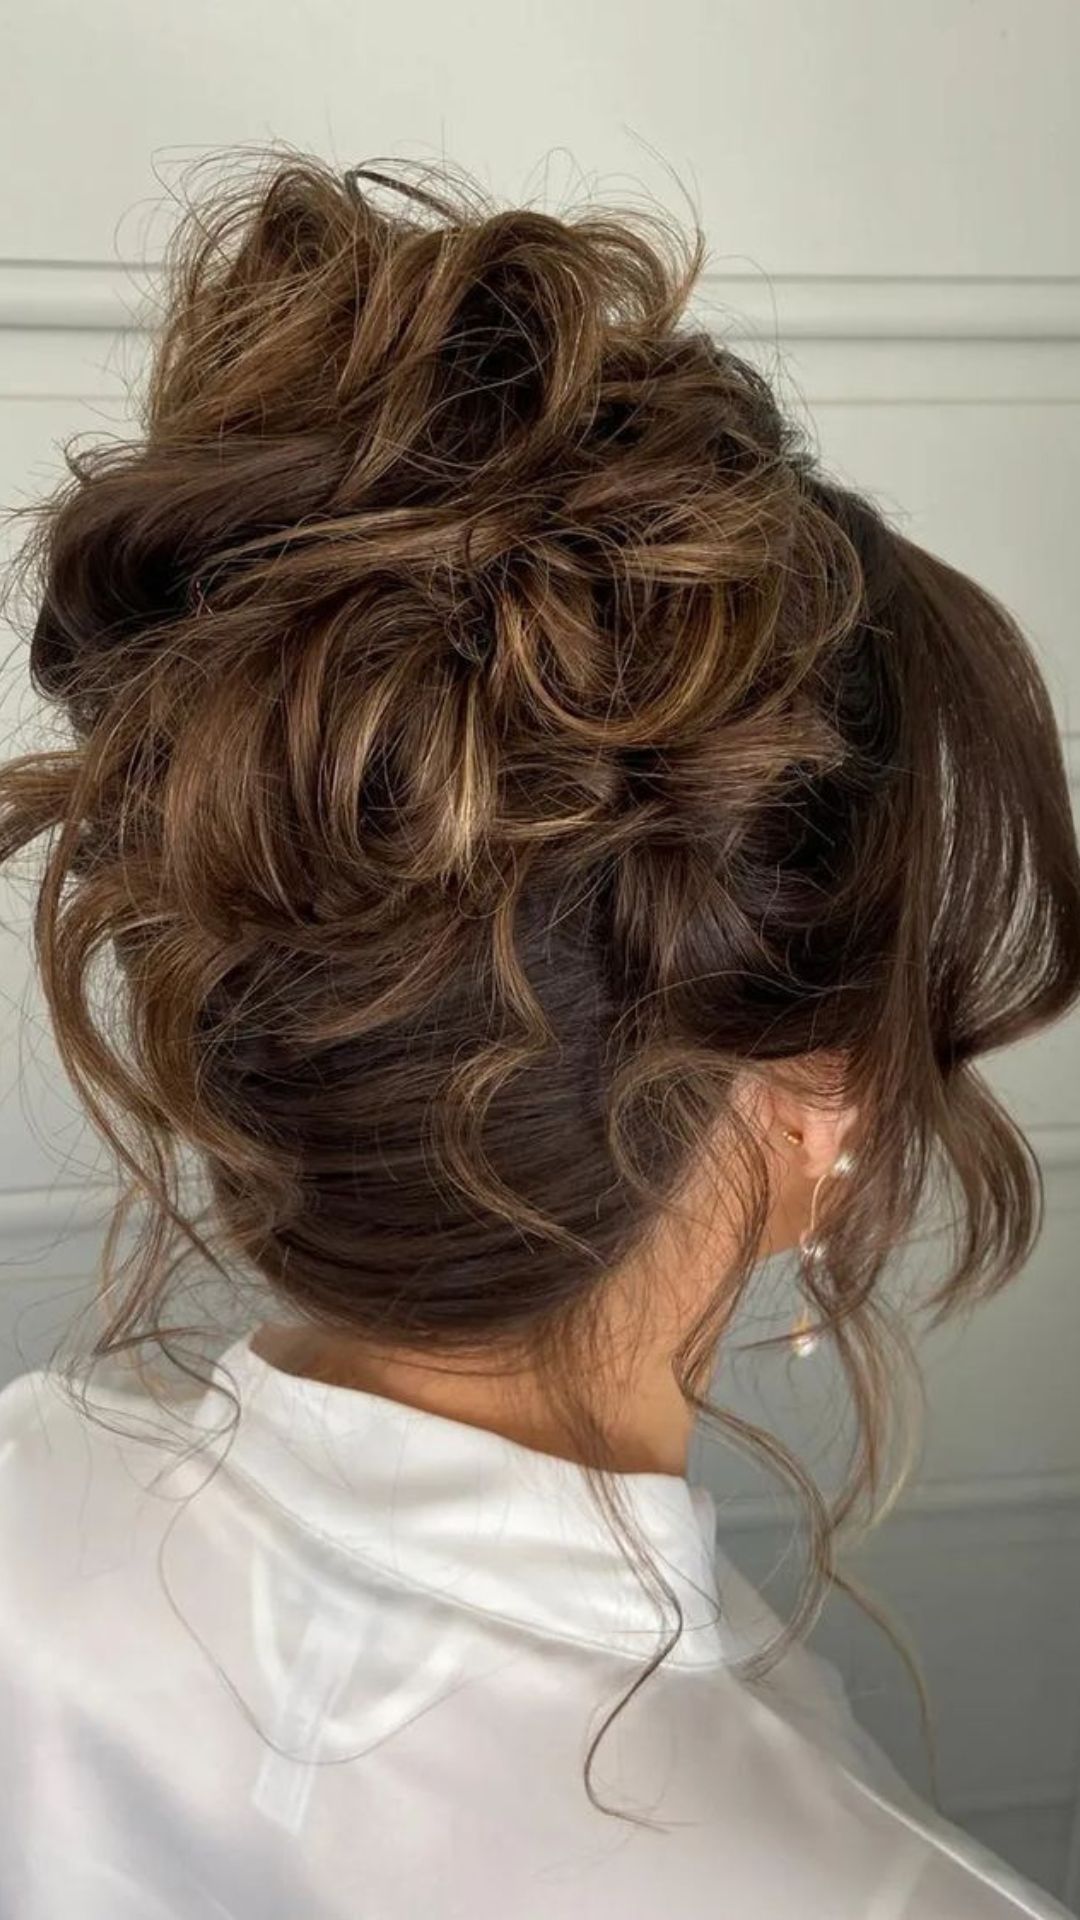 A woman with a textured high bun with loose curls.